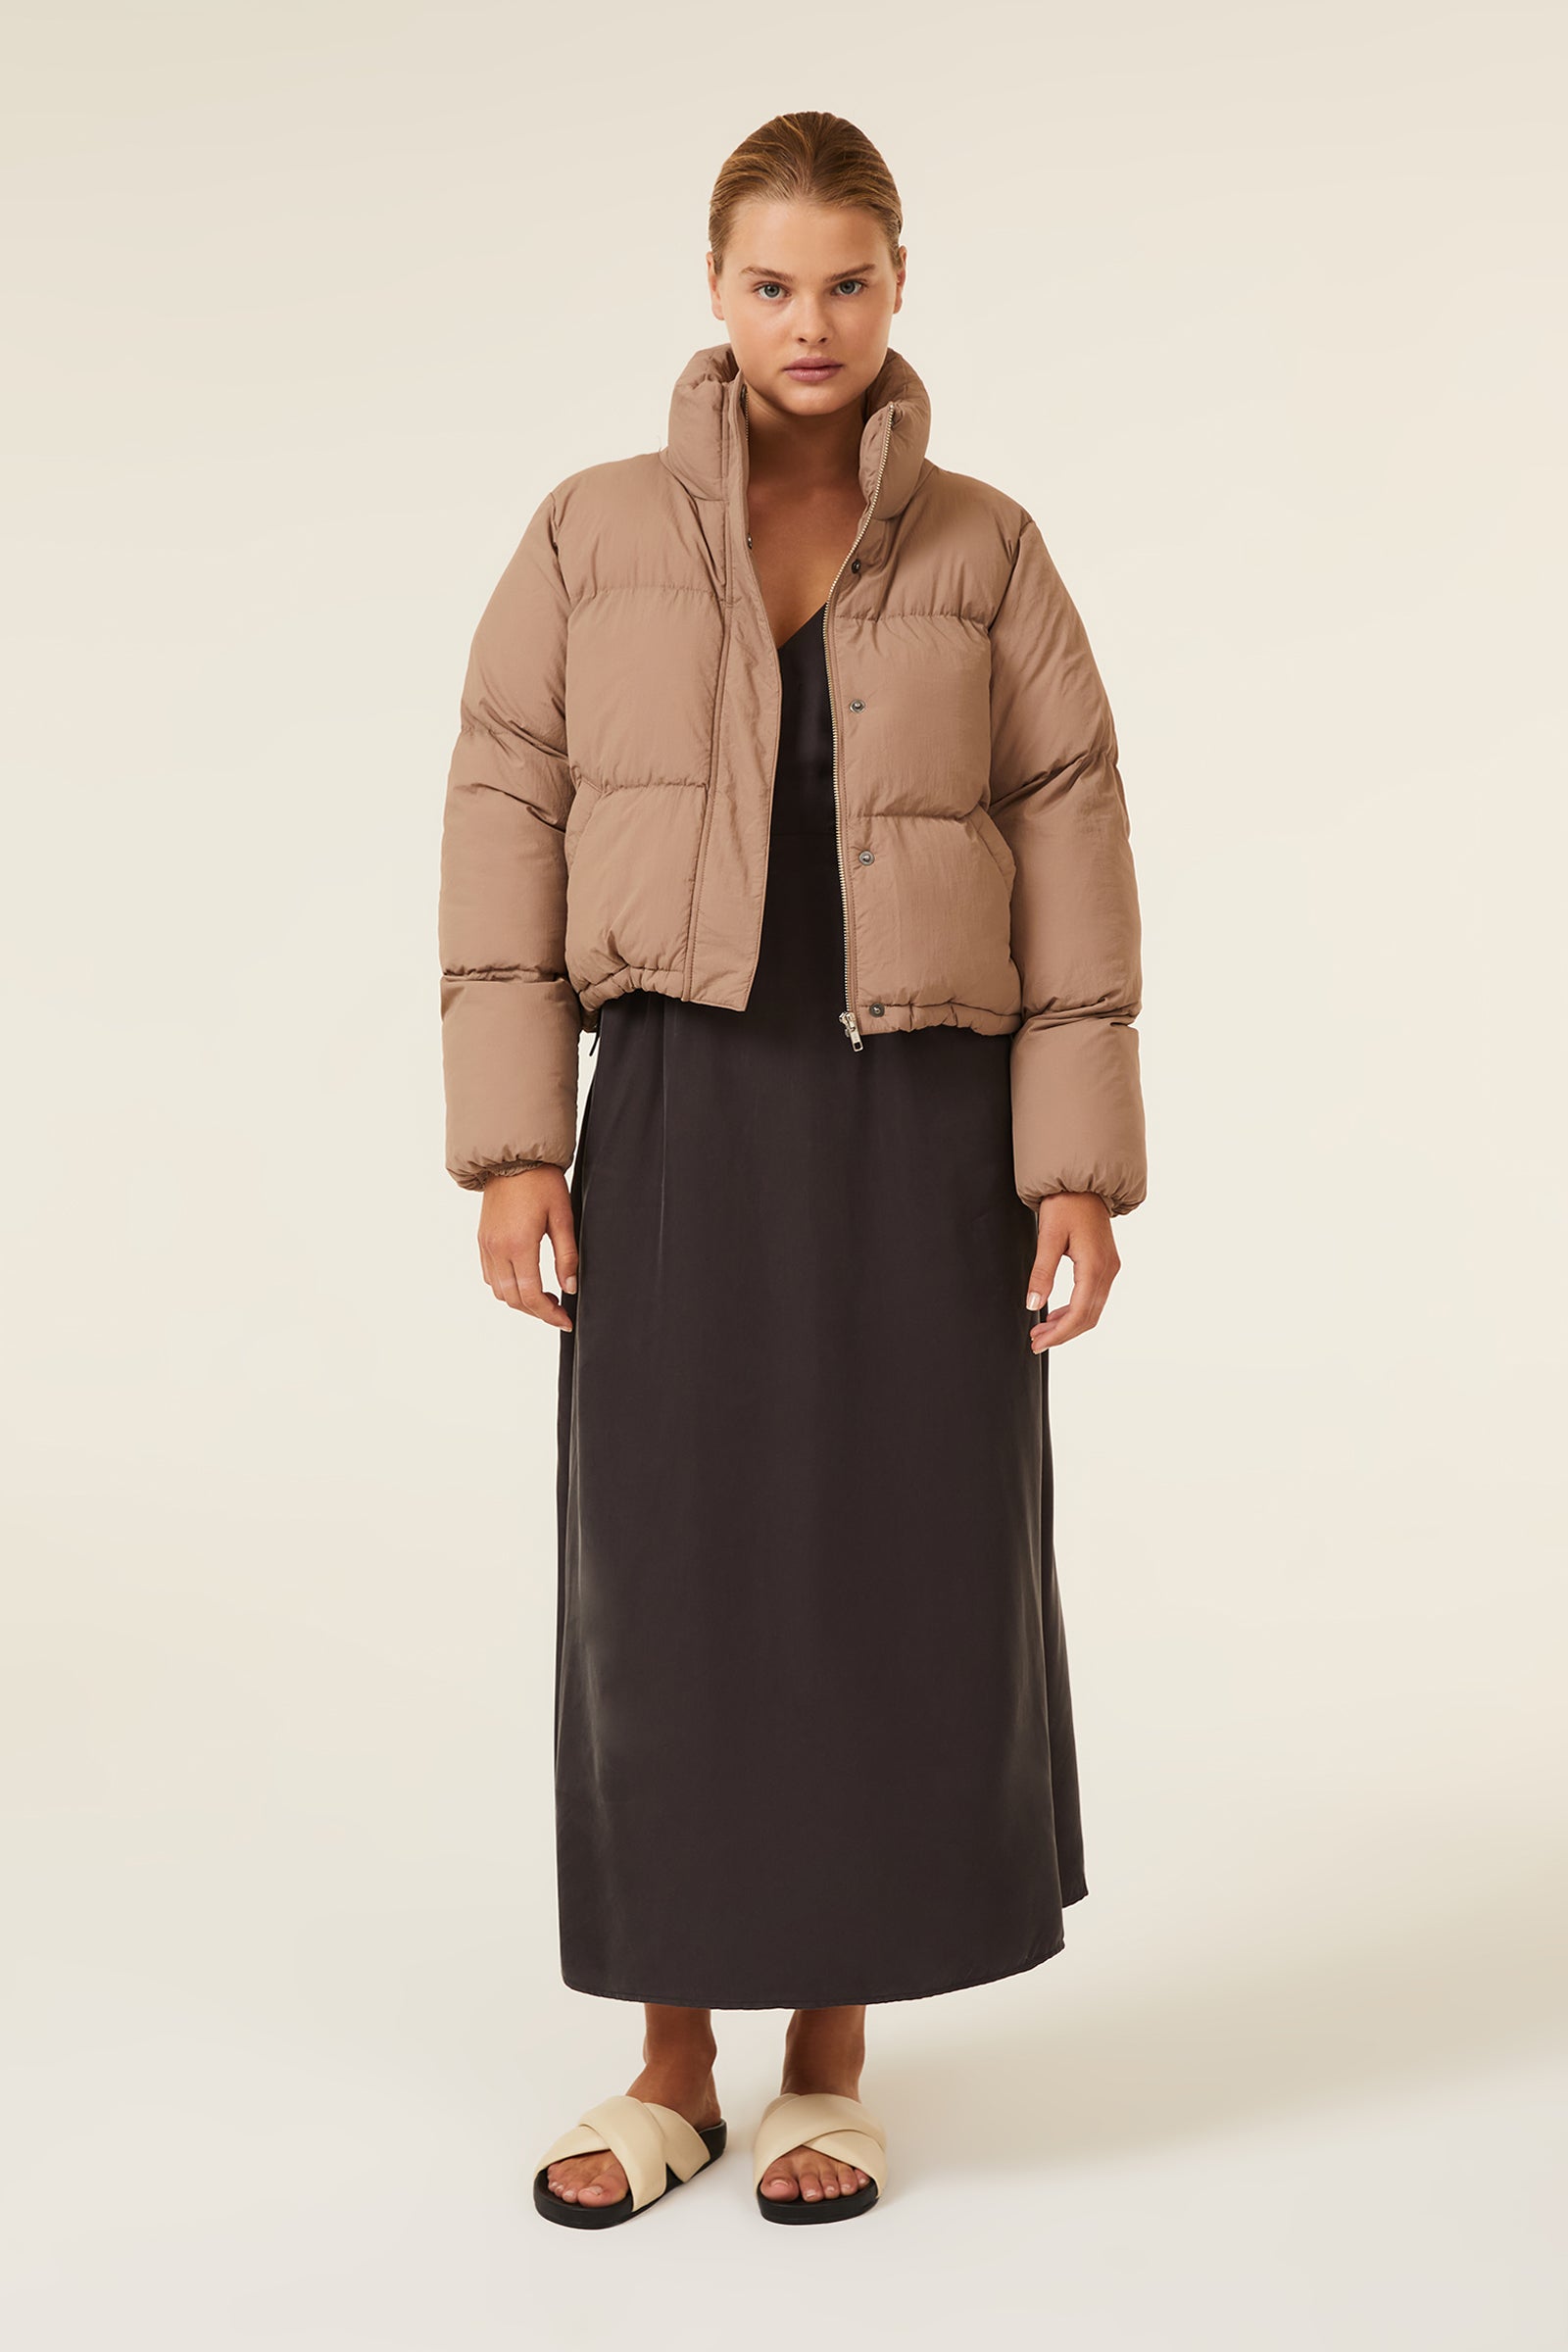 Nude Lucy Topher Puffer Jacket In A Brown Carob Colour 